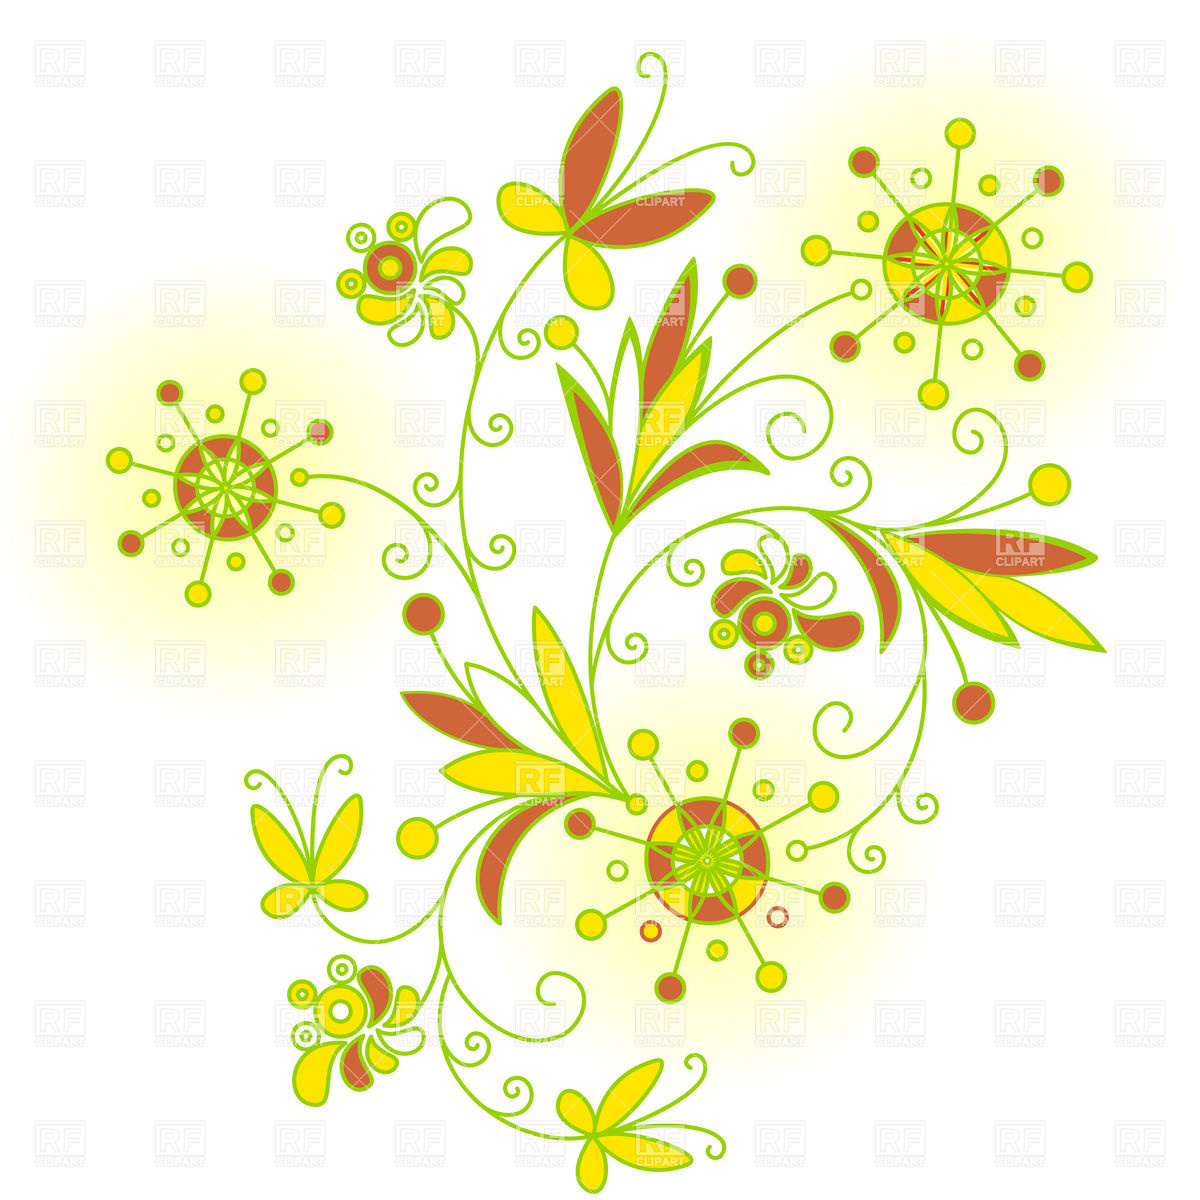 Abstract Floral Design With Symbolic Flowers 8502 Design Elements